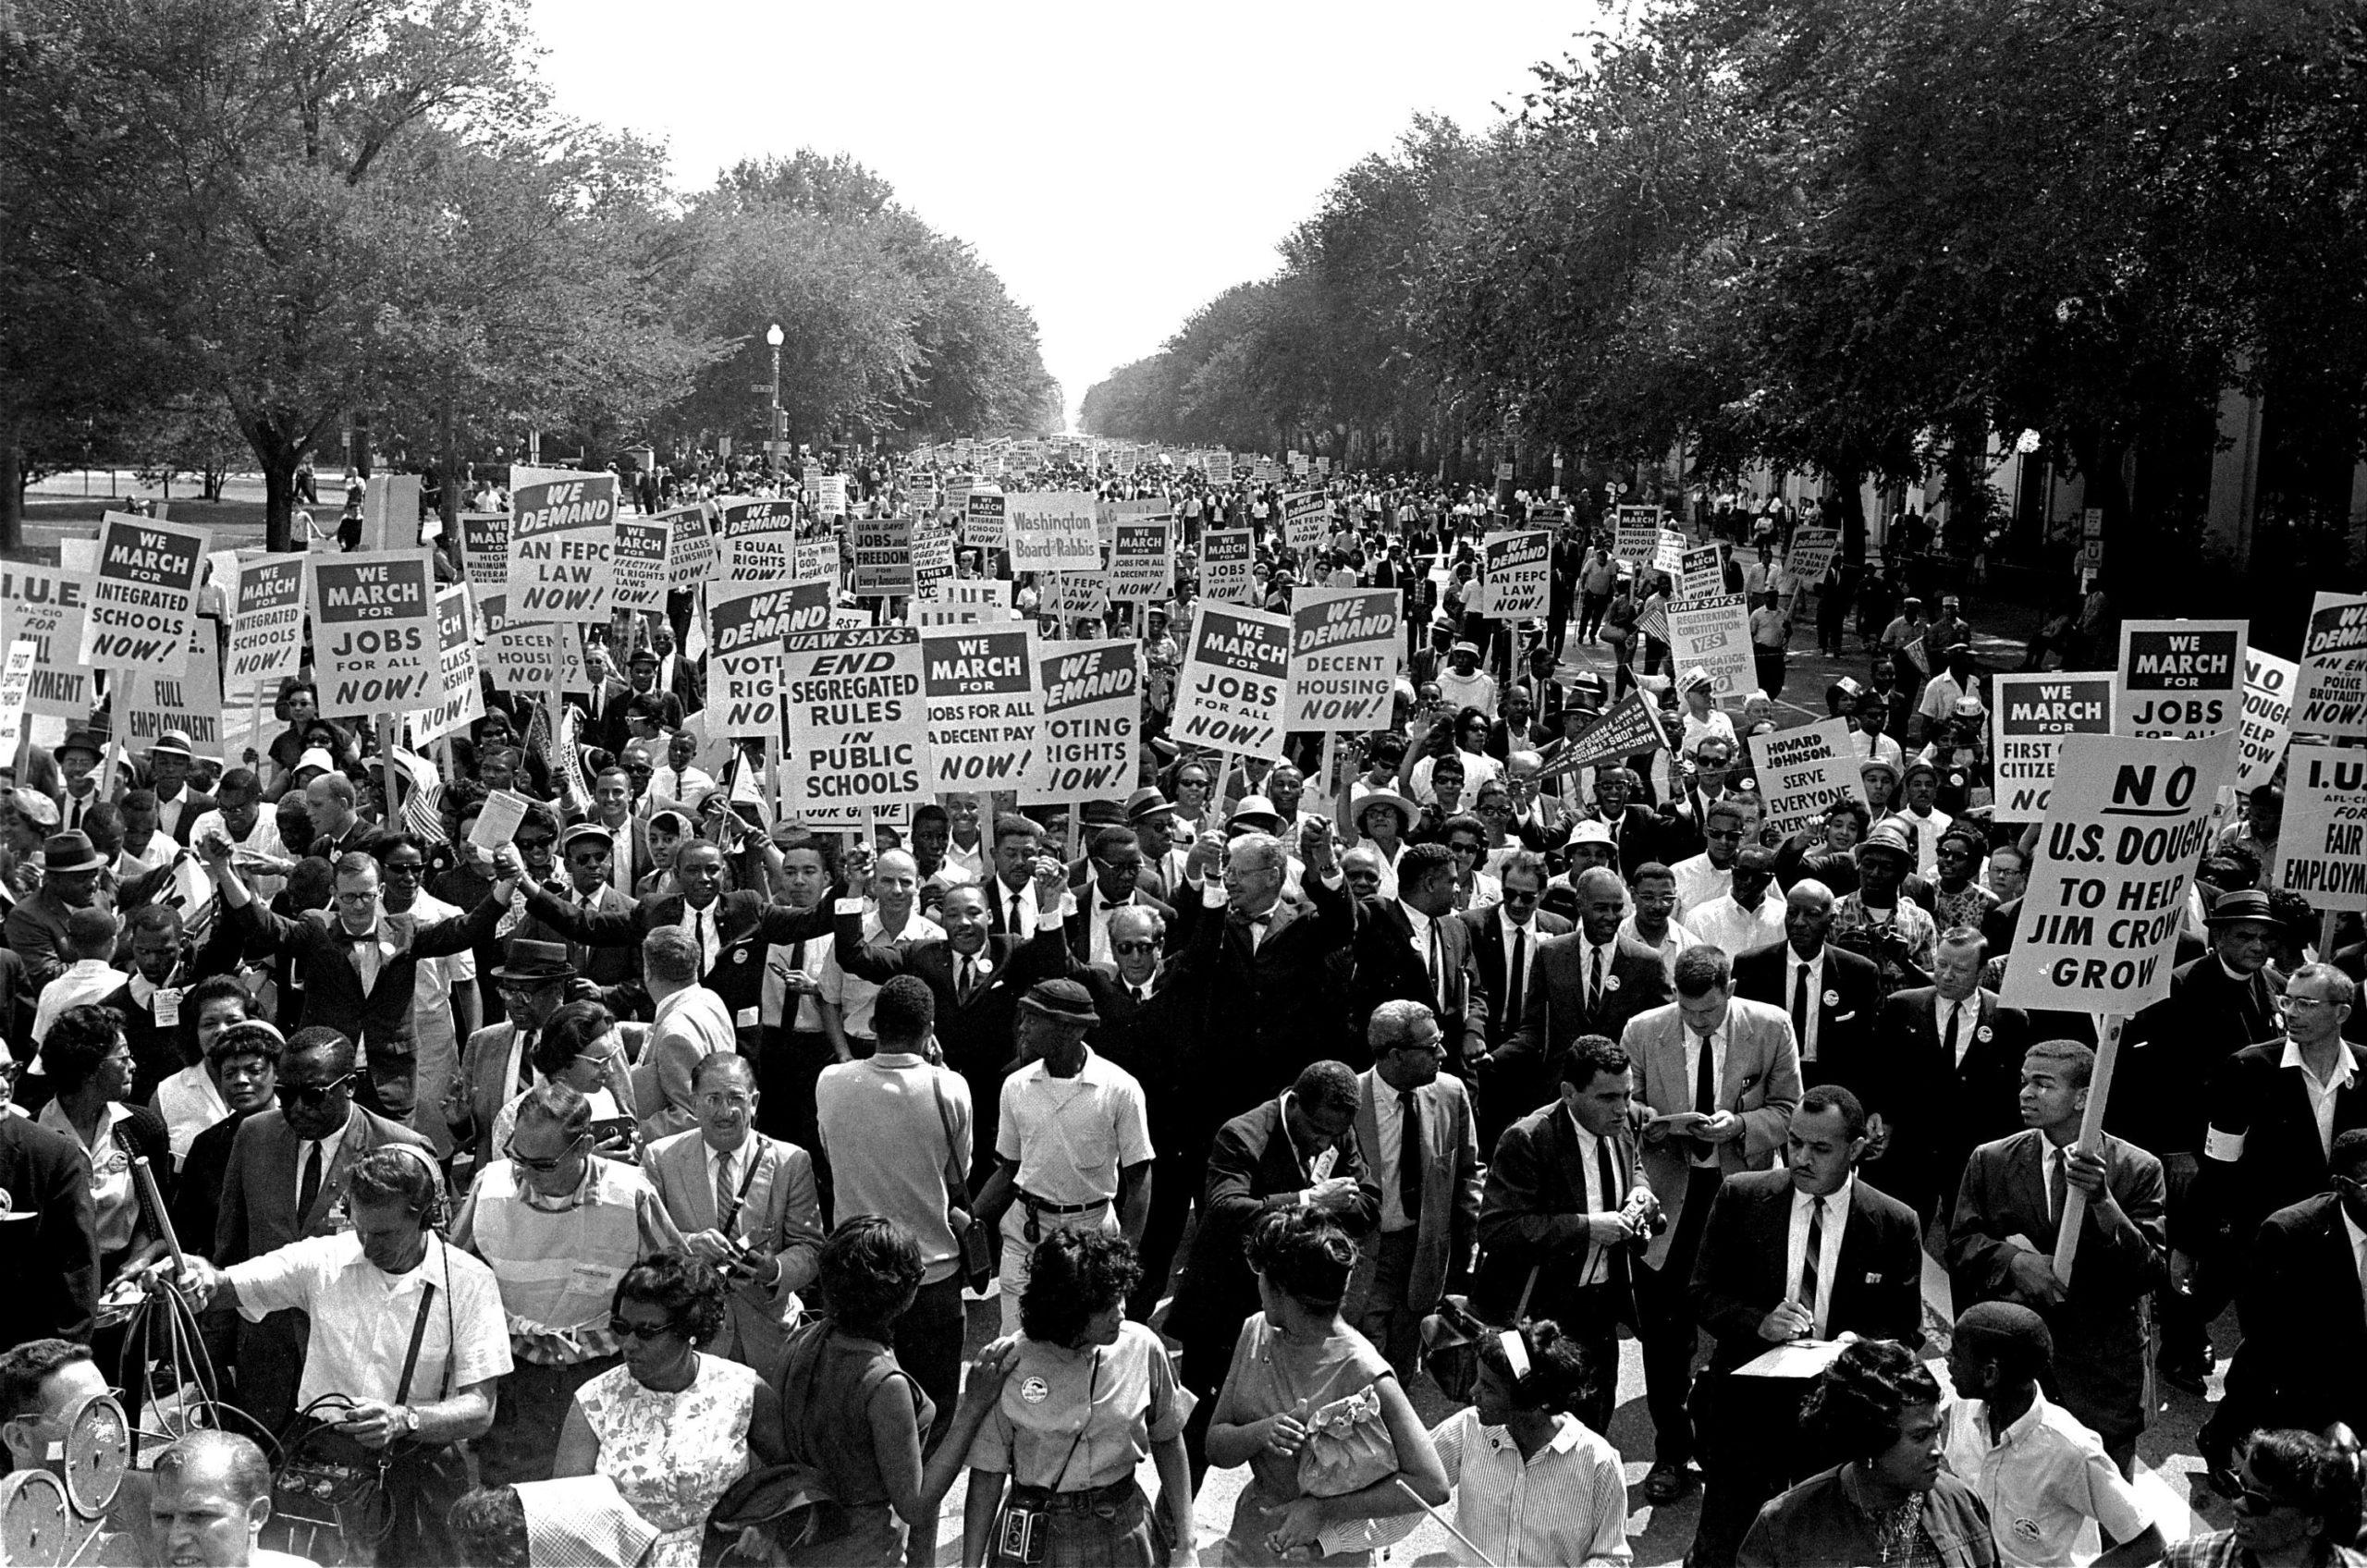 59th anniversary of the March on Washington